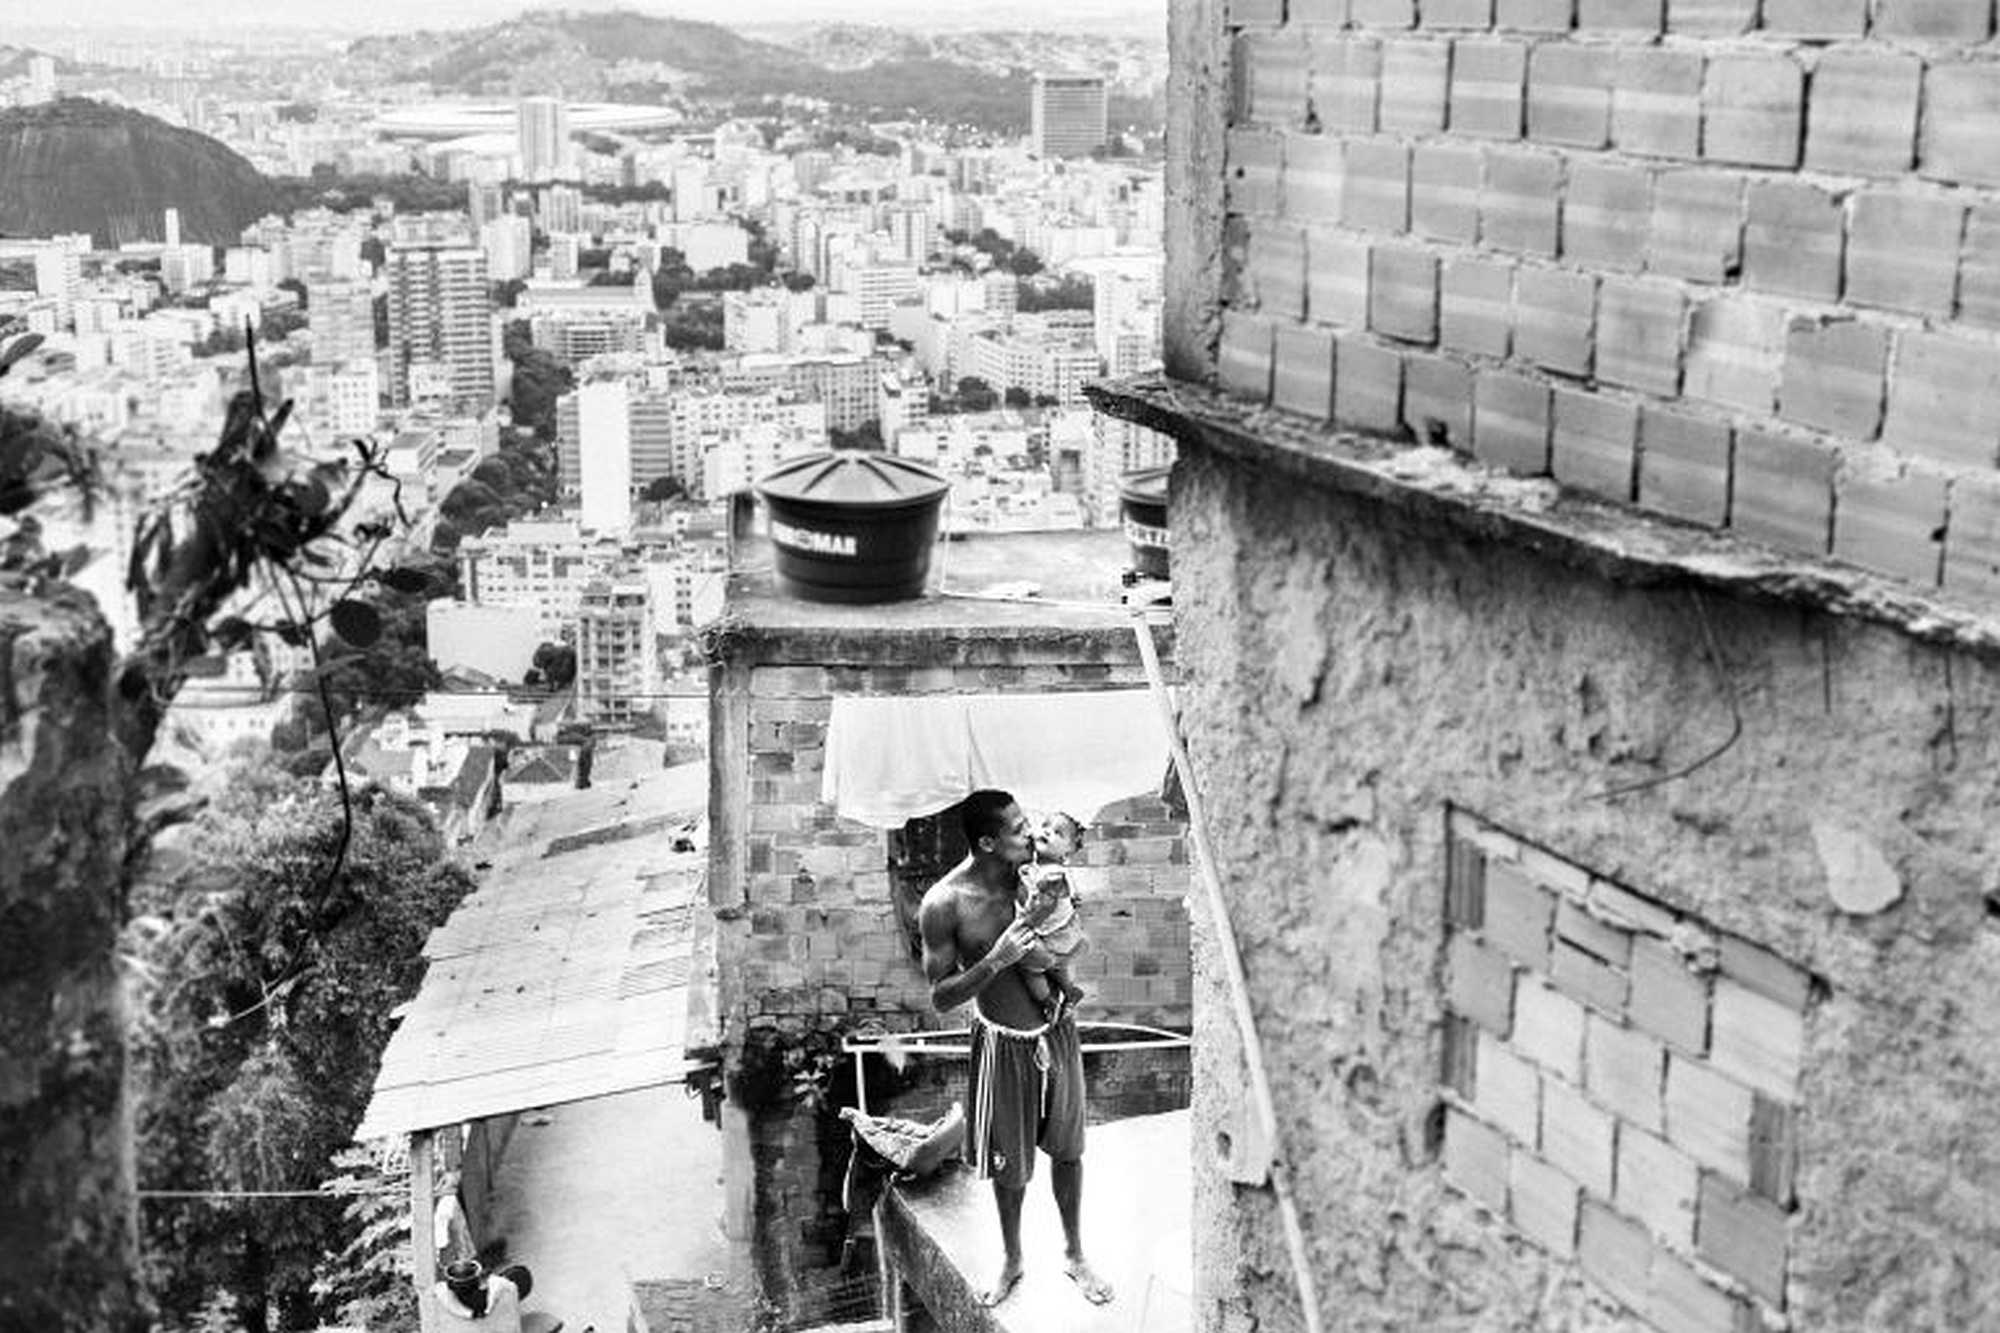 A father kisses her daughter in Pedacinho do Céu (Little Piece of Heaven), one of the highest points of Turano favela. Photo: Fabrício Mota